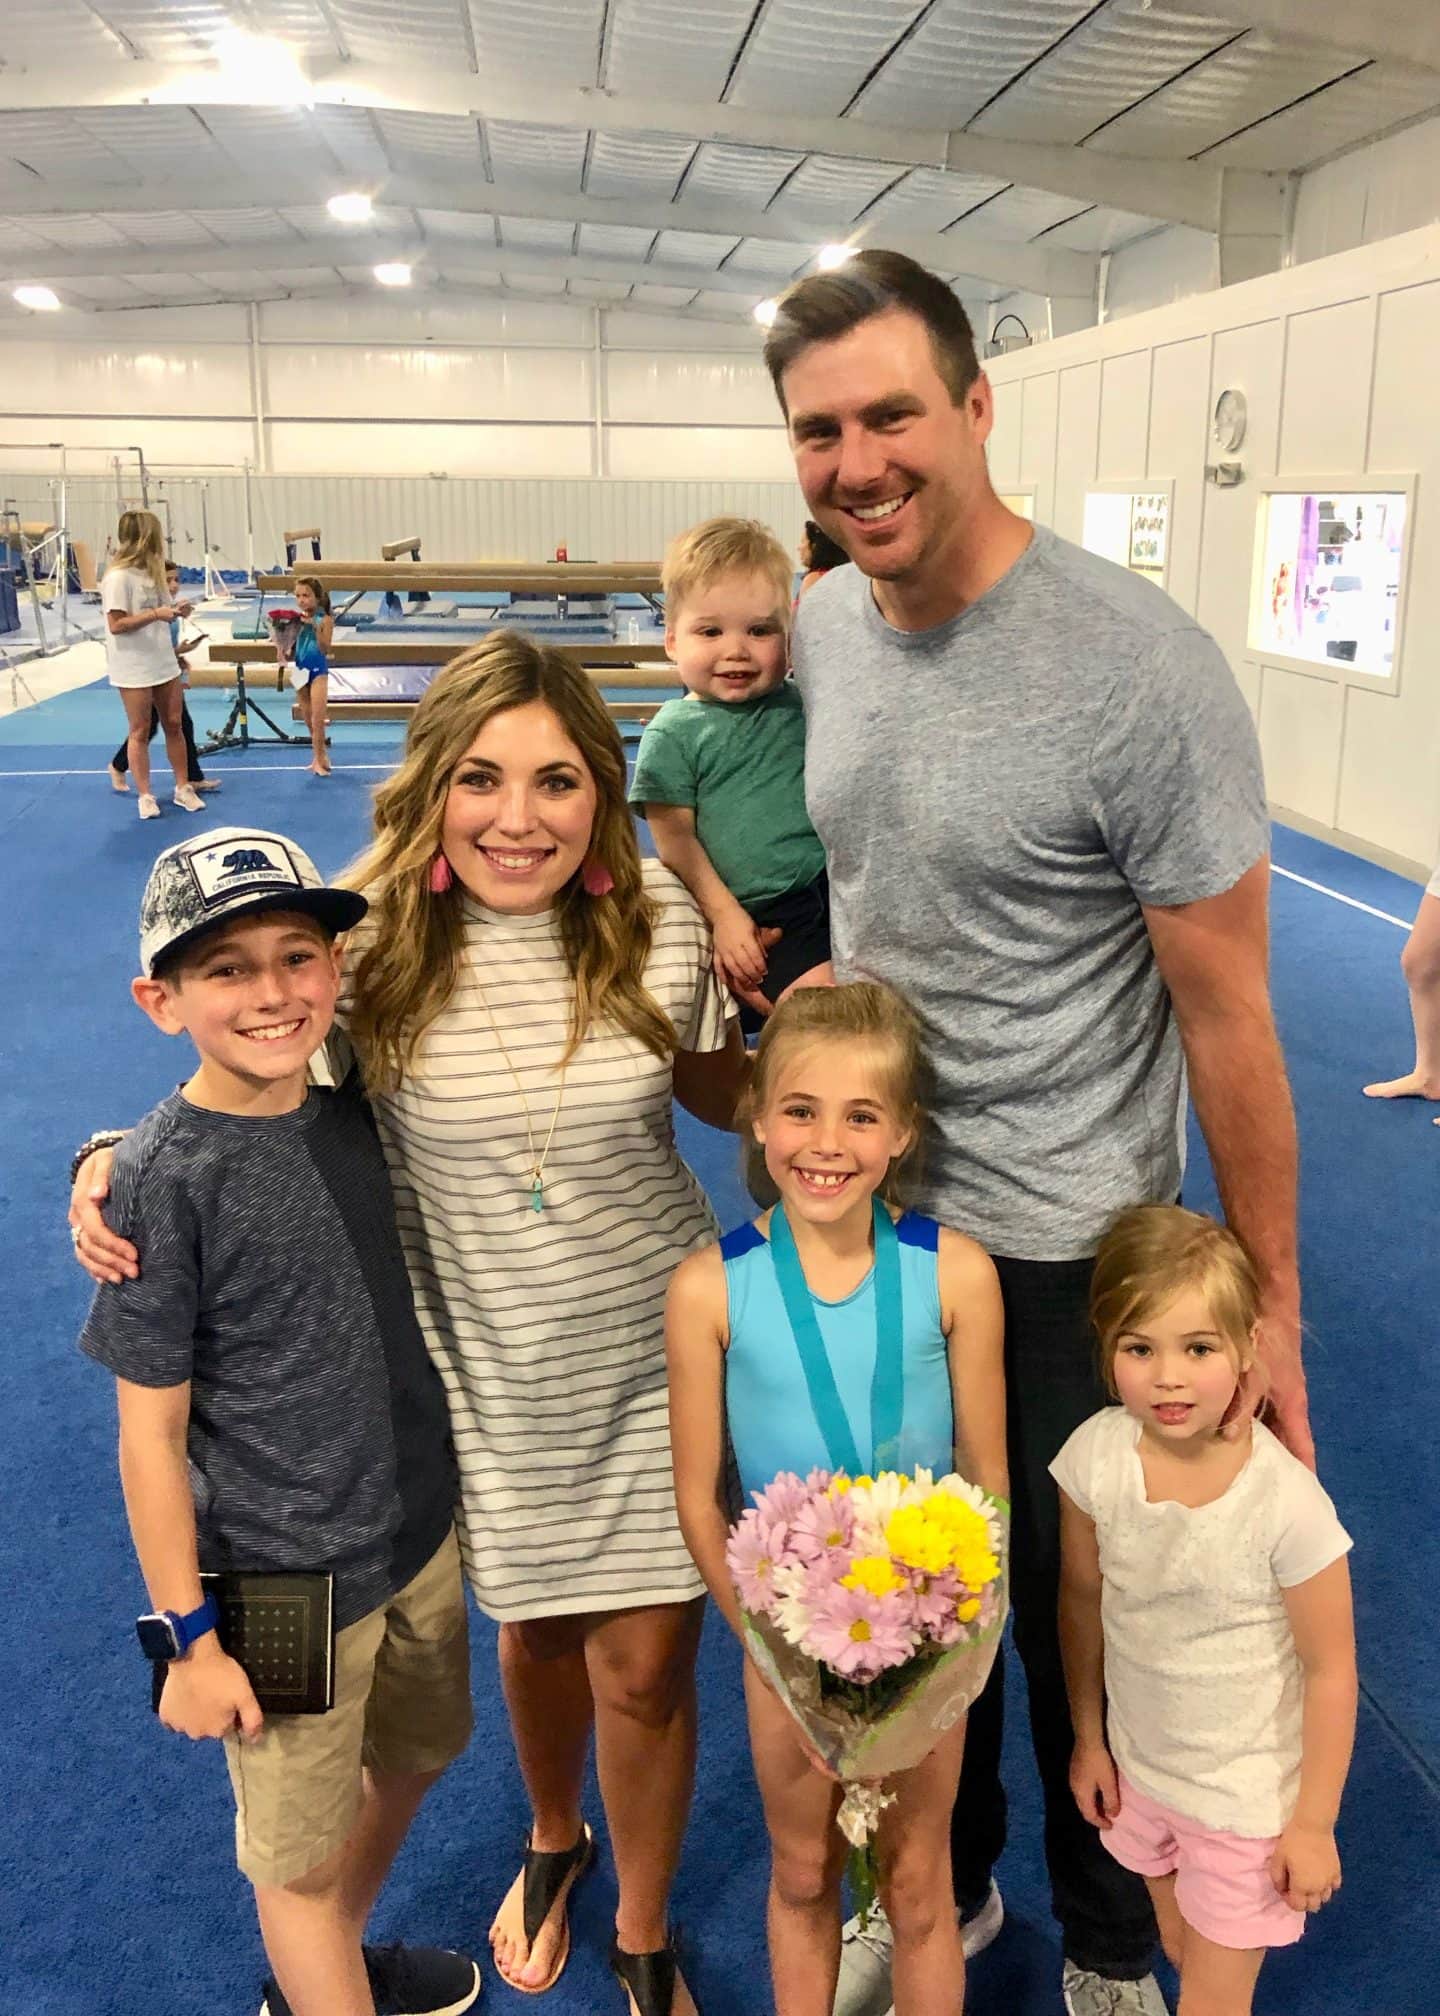 family support at gymnastics